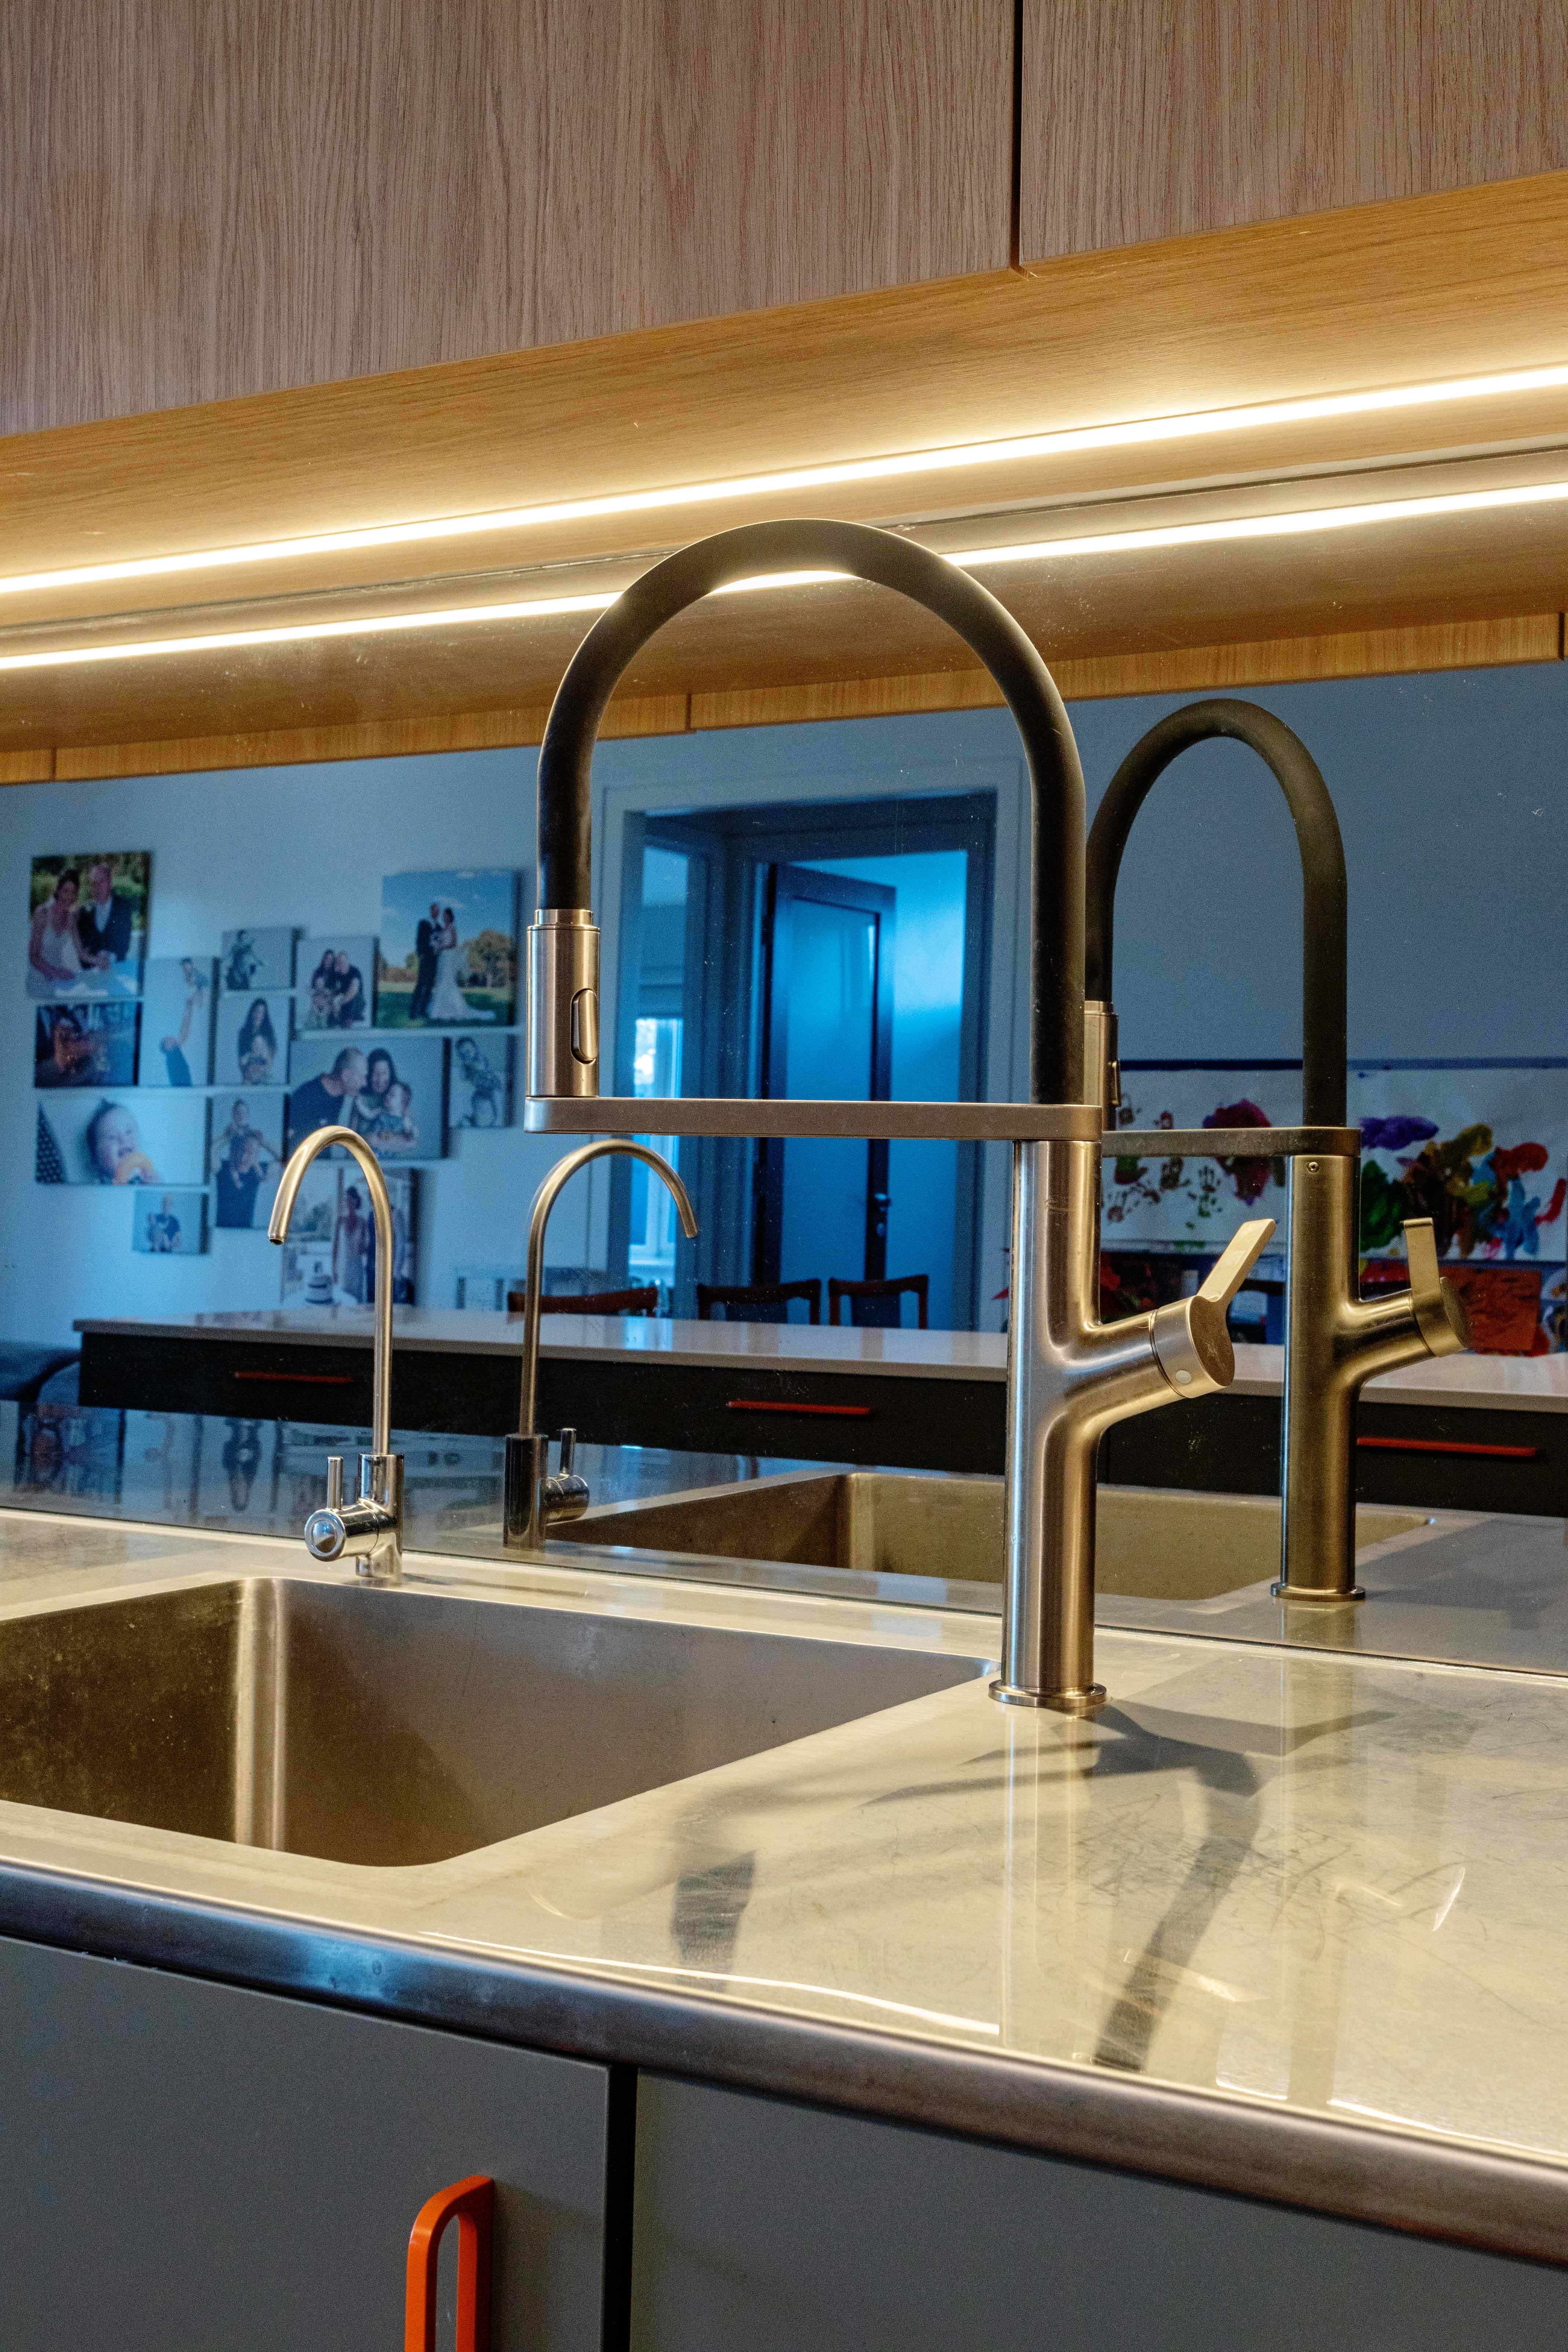 Stainless steel kitchen bench with sensor tap